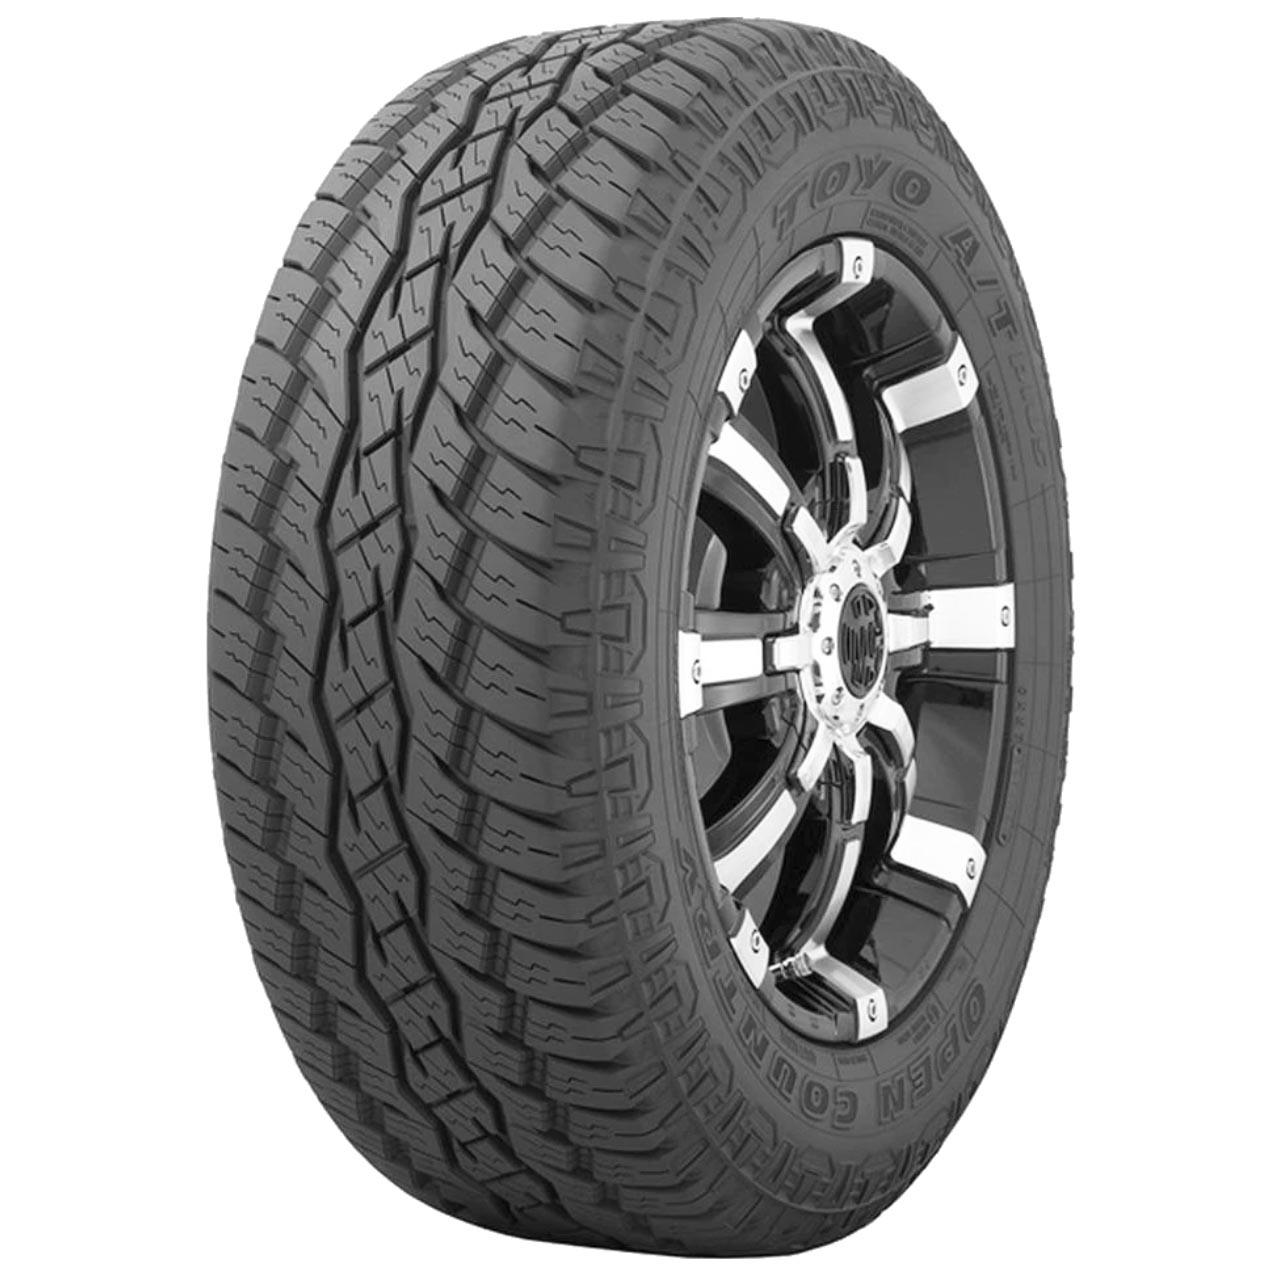 Toyo Open Country AT Plus 285/50R20 116T XL